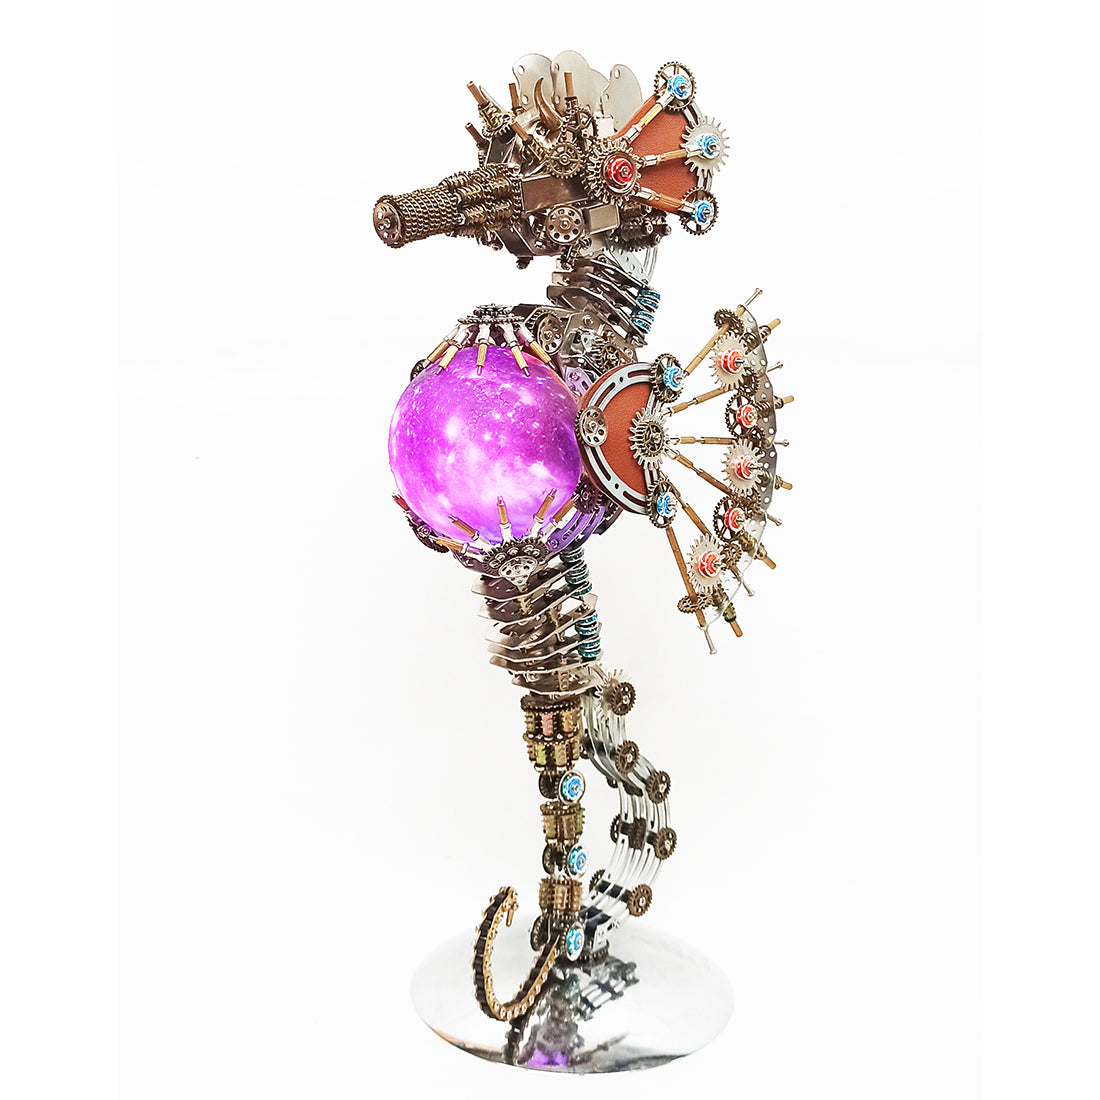 Steampunk Style Pregnant Seahorse Holding Planet  Metal Model Kits -Keep the Planet Healthy